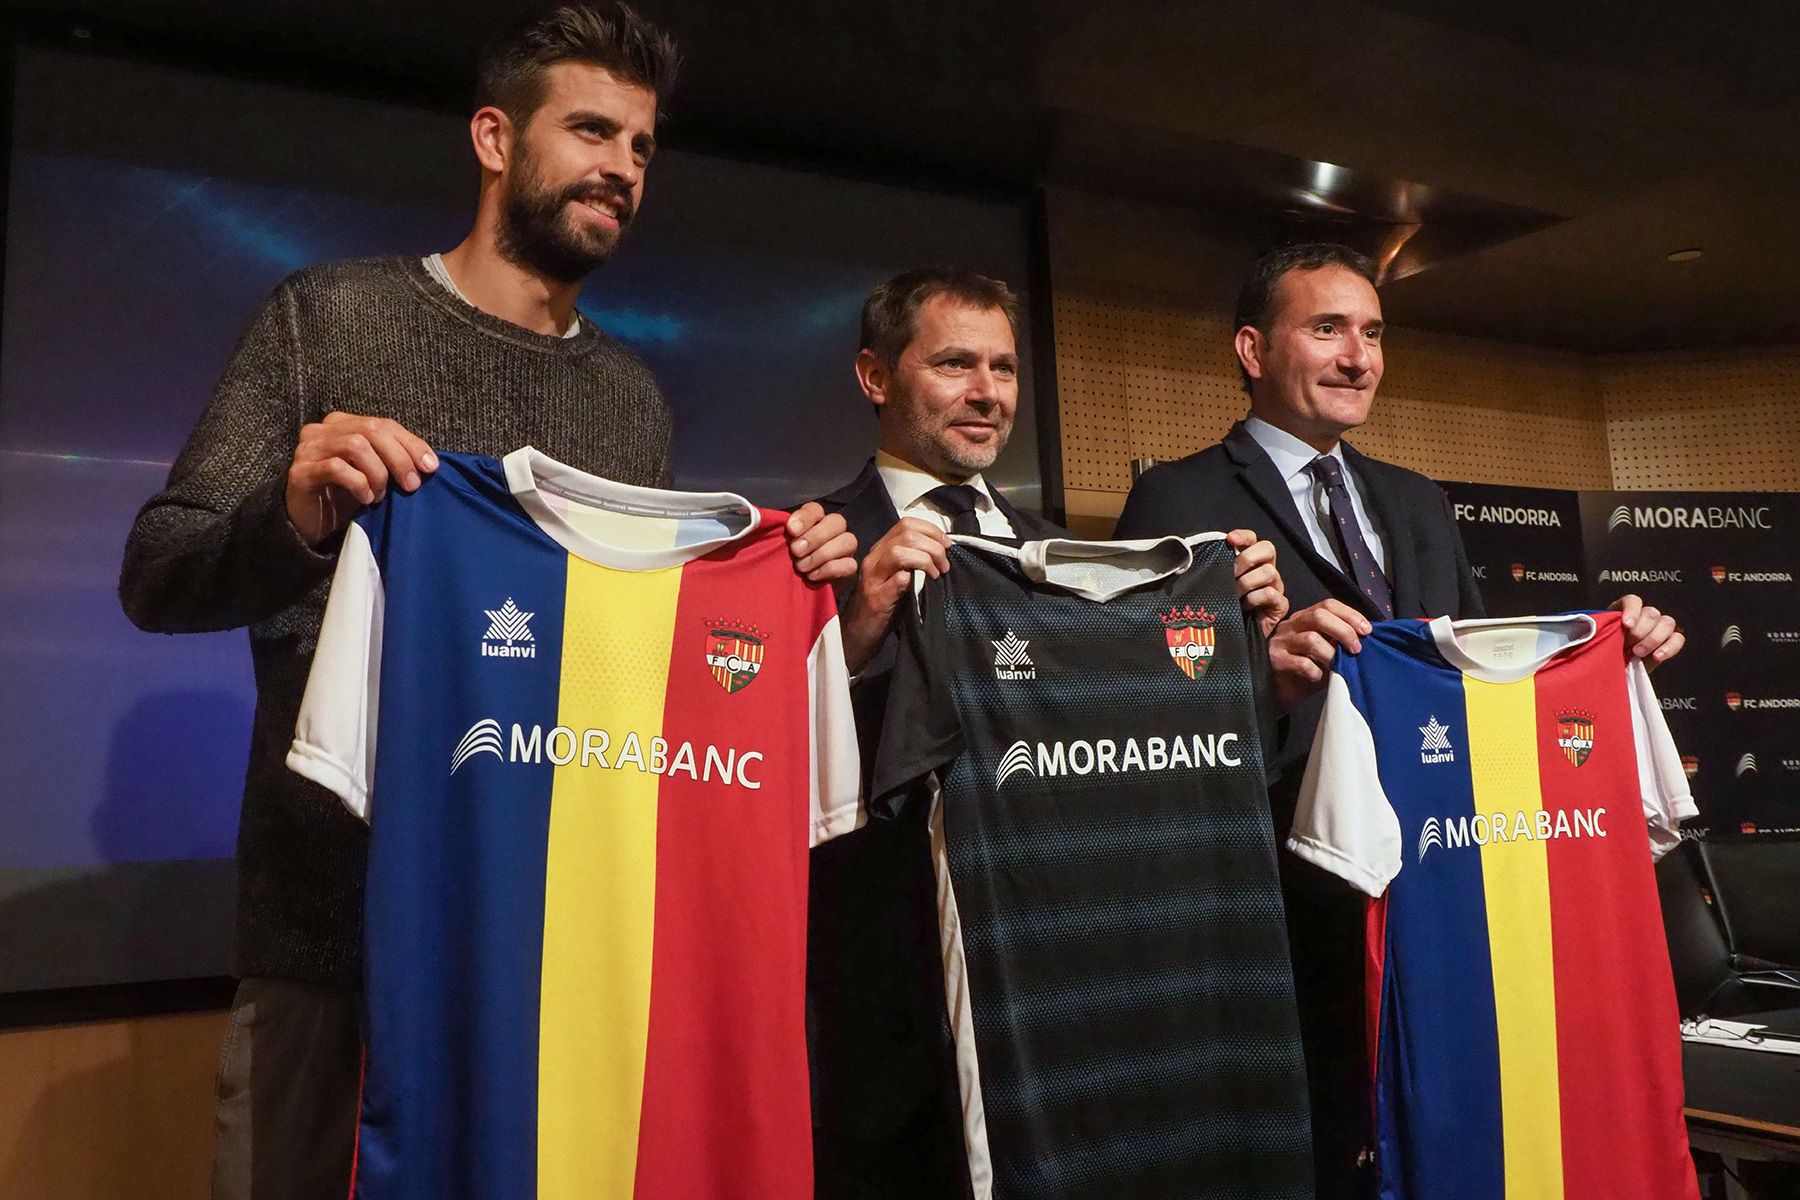 Gerard Piqué, owner of Andorra, poses with his shirt